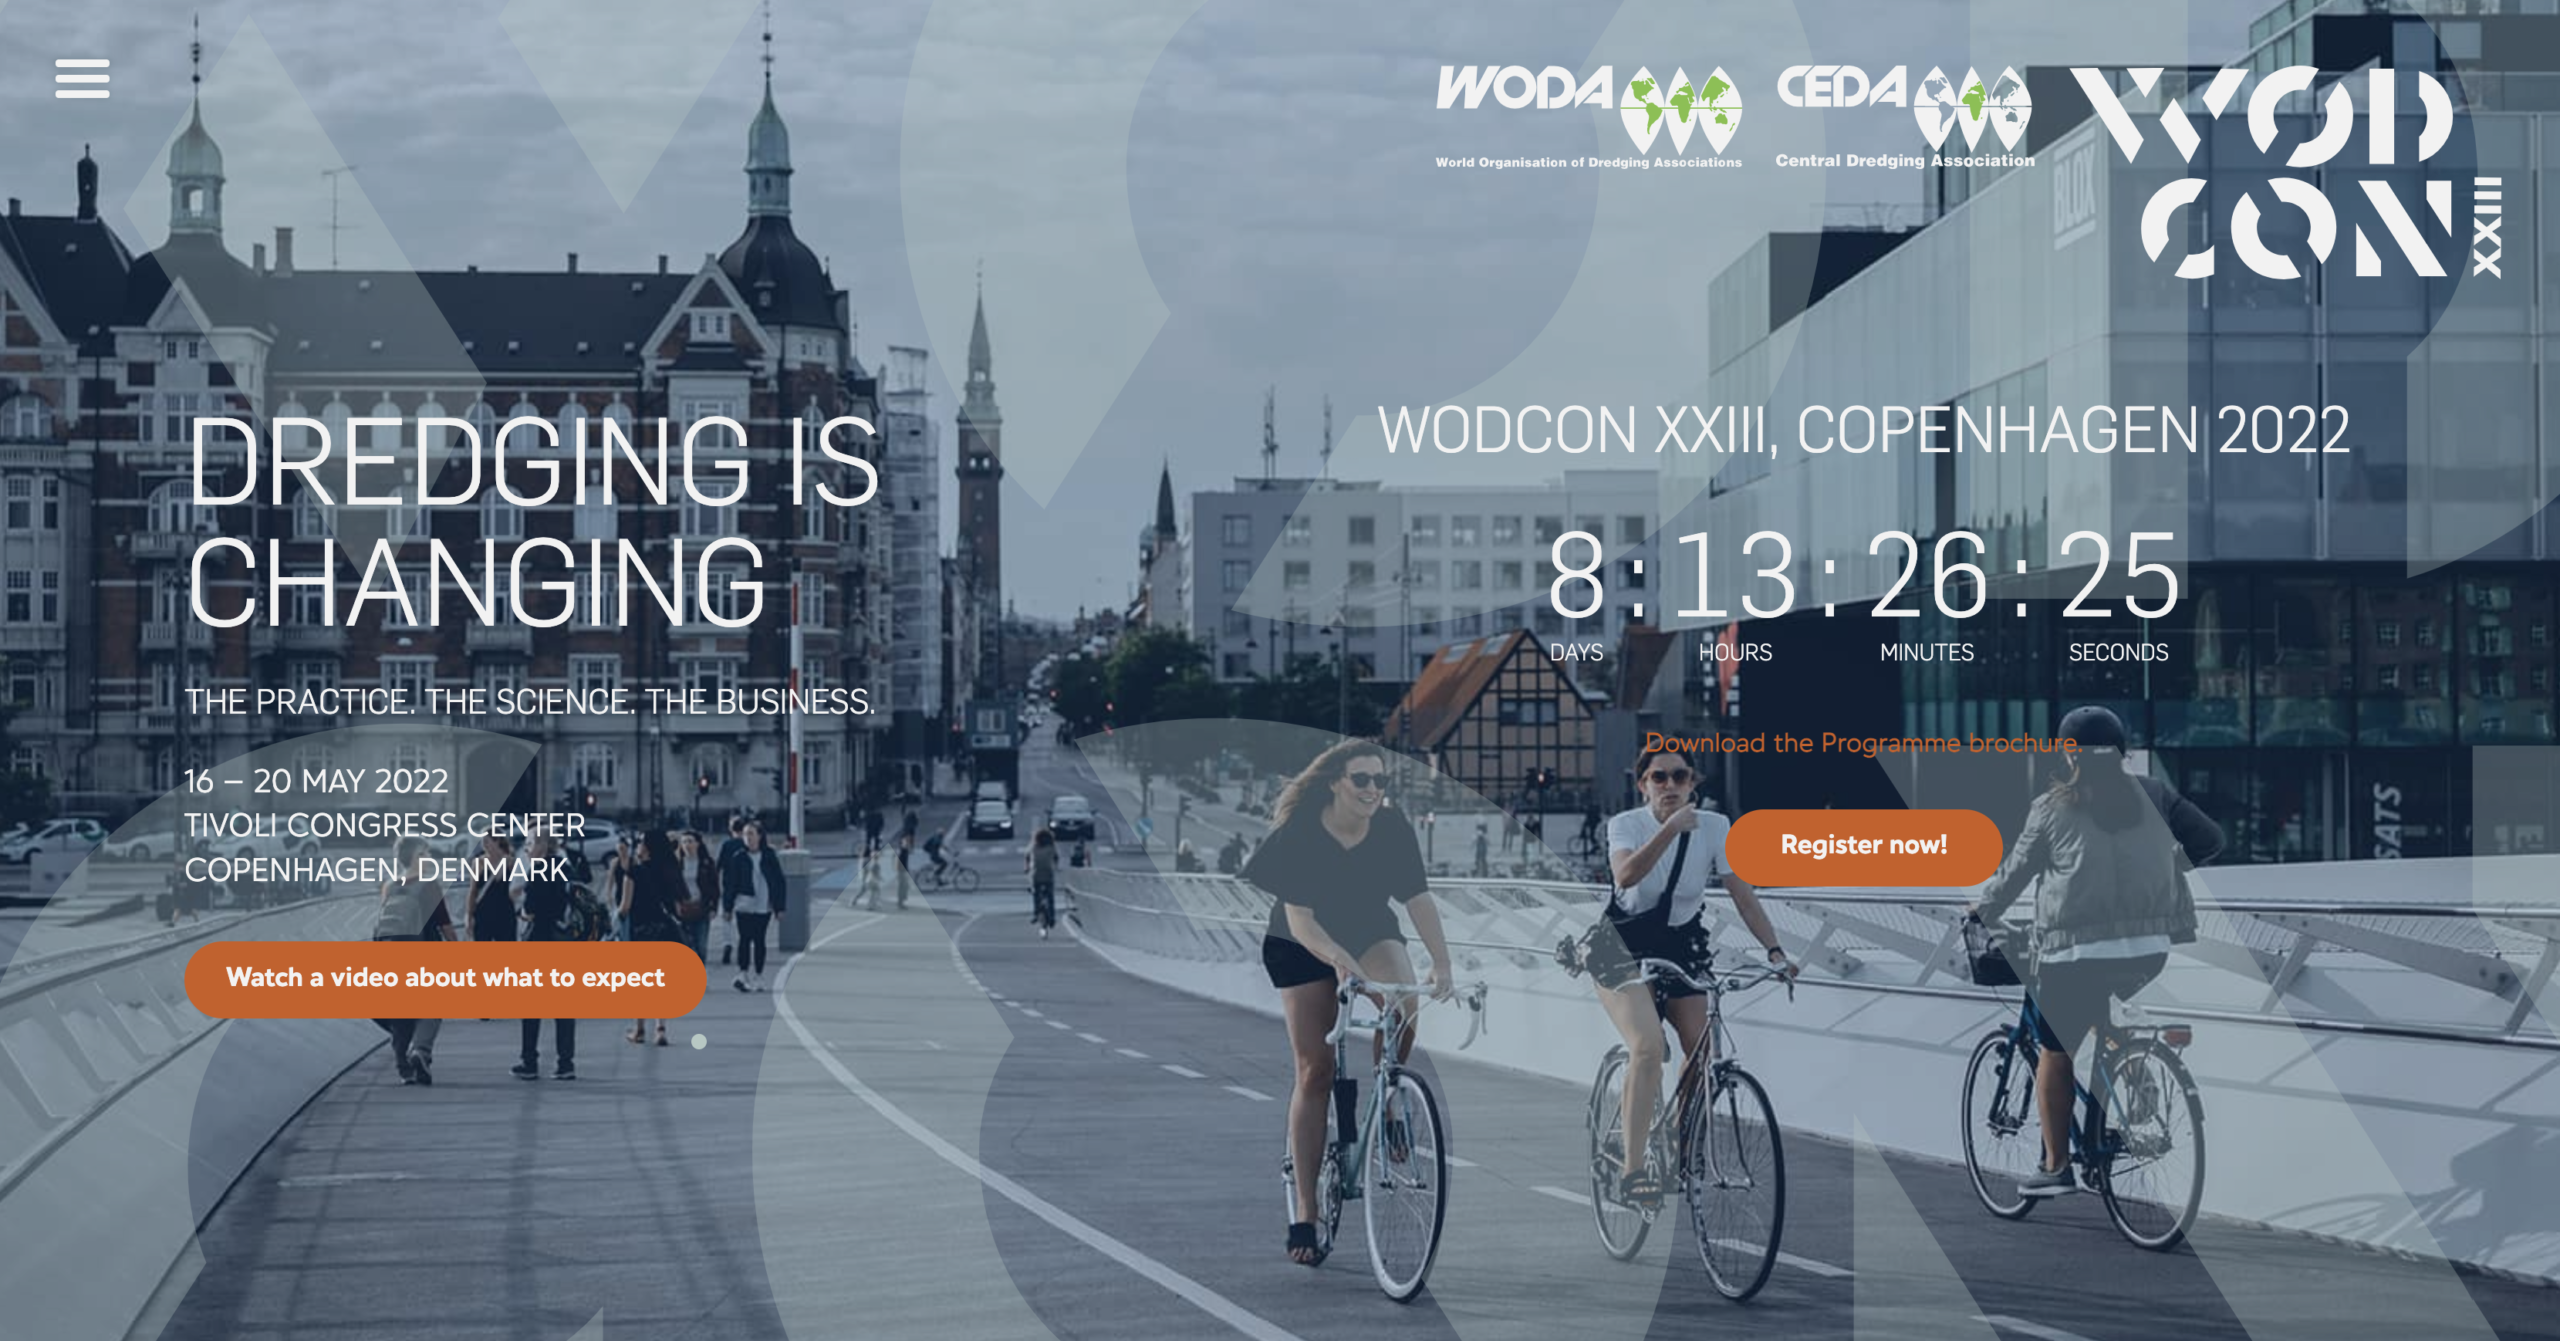 Ecocoast to be at WODCON for the first time